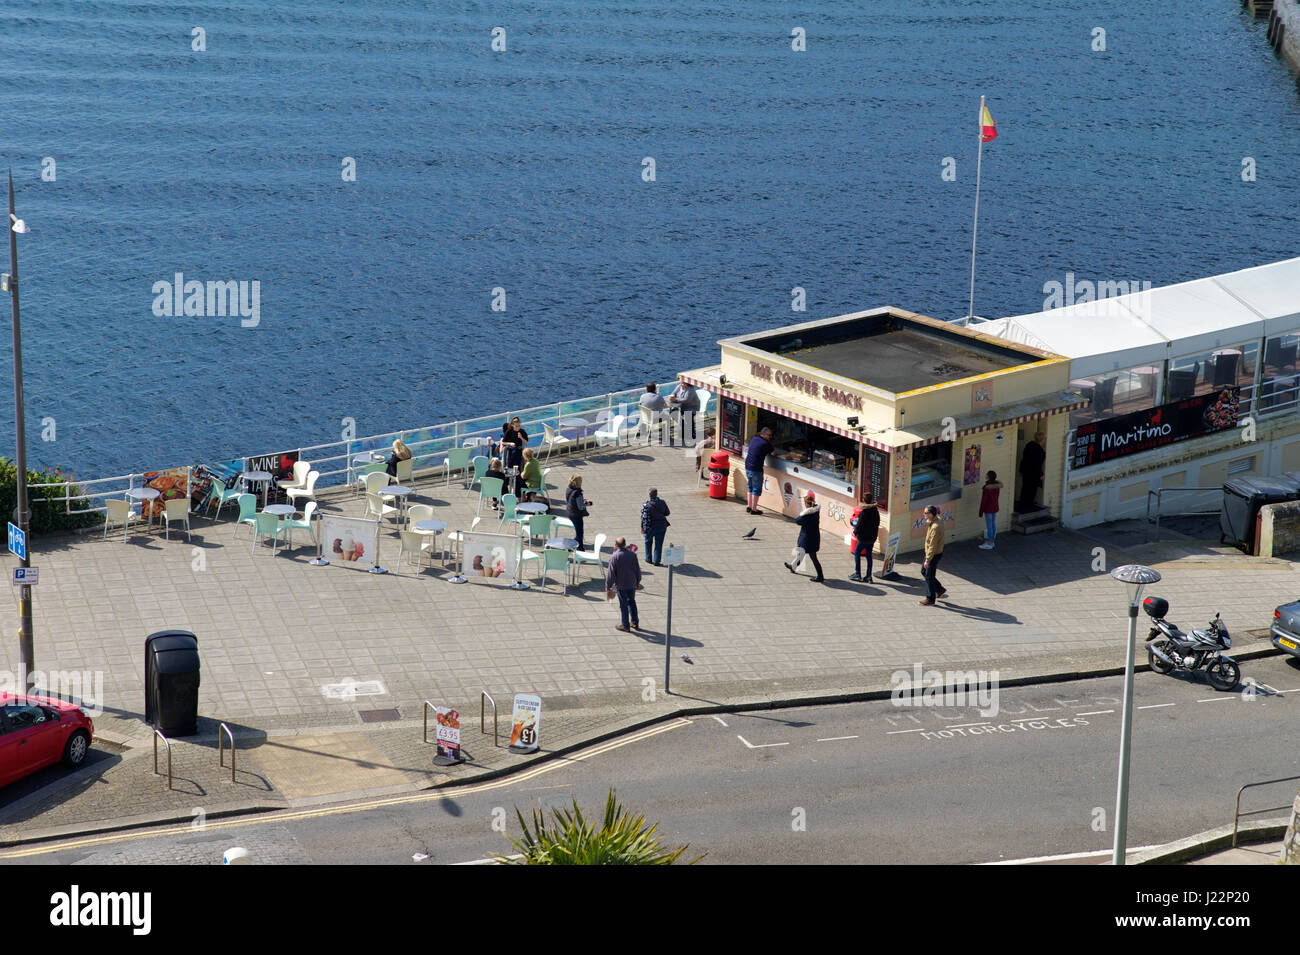 Snack Bar by the sea, UK Stock Photo